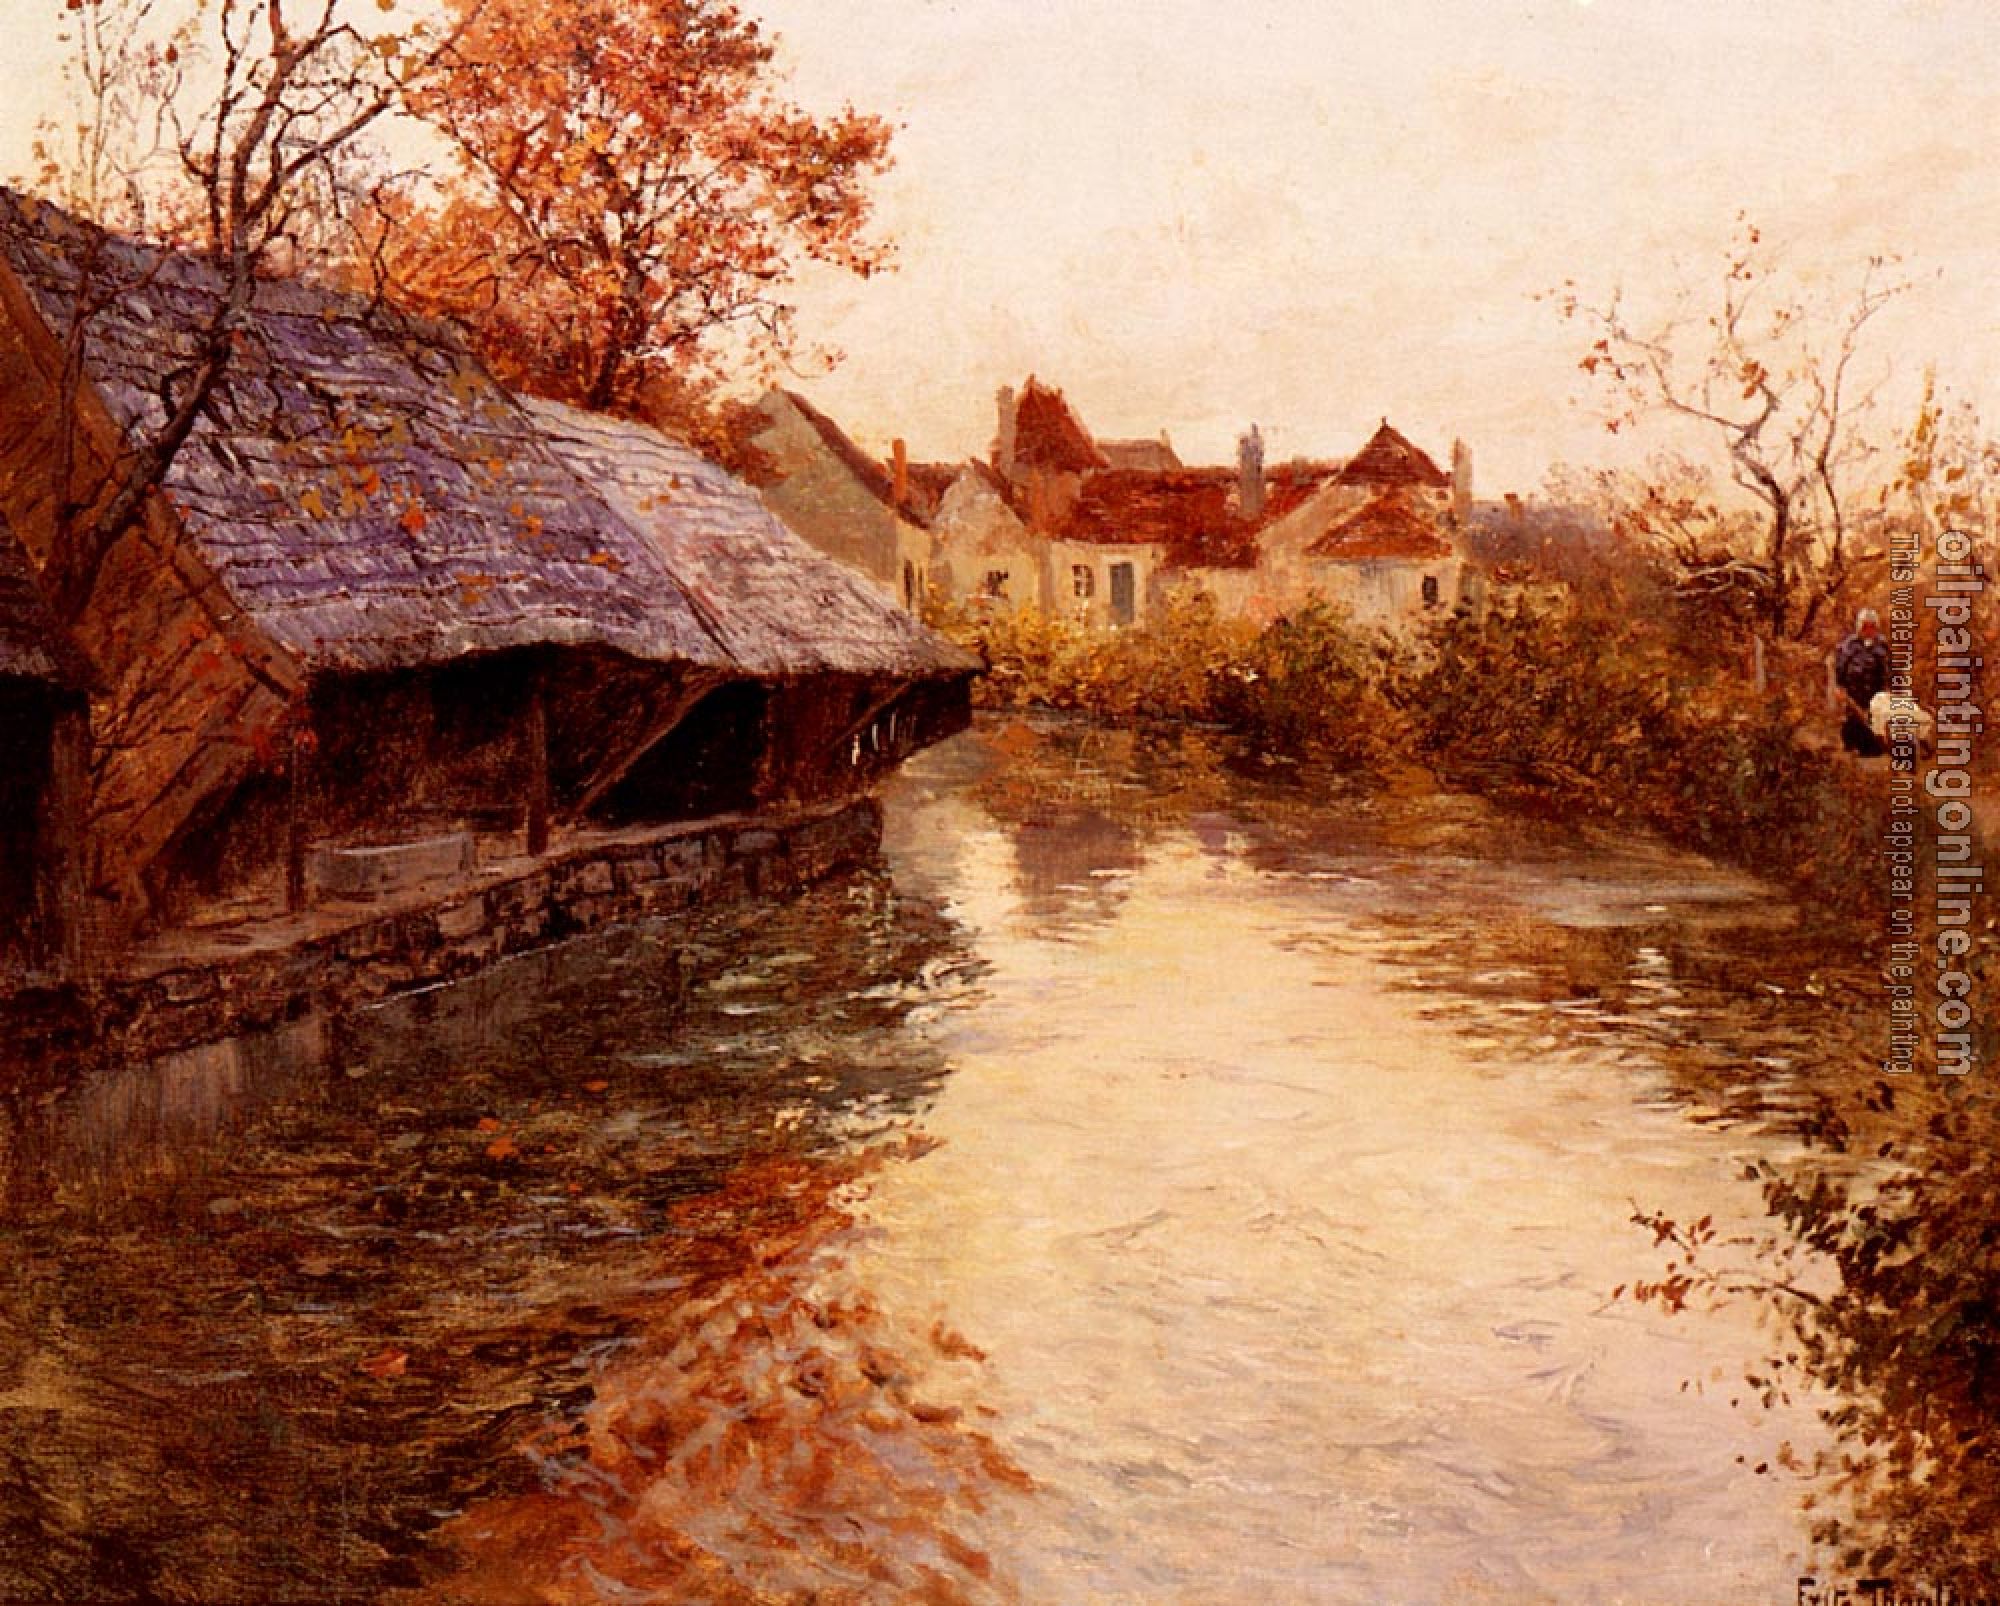 Thaulow, Frits - A Morning River Scene